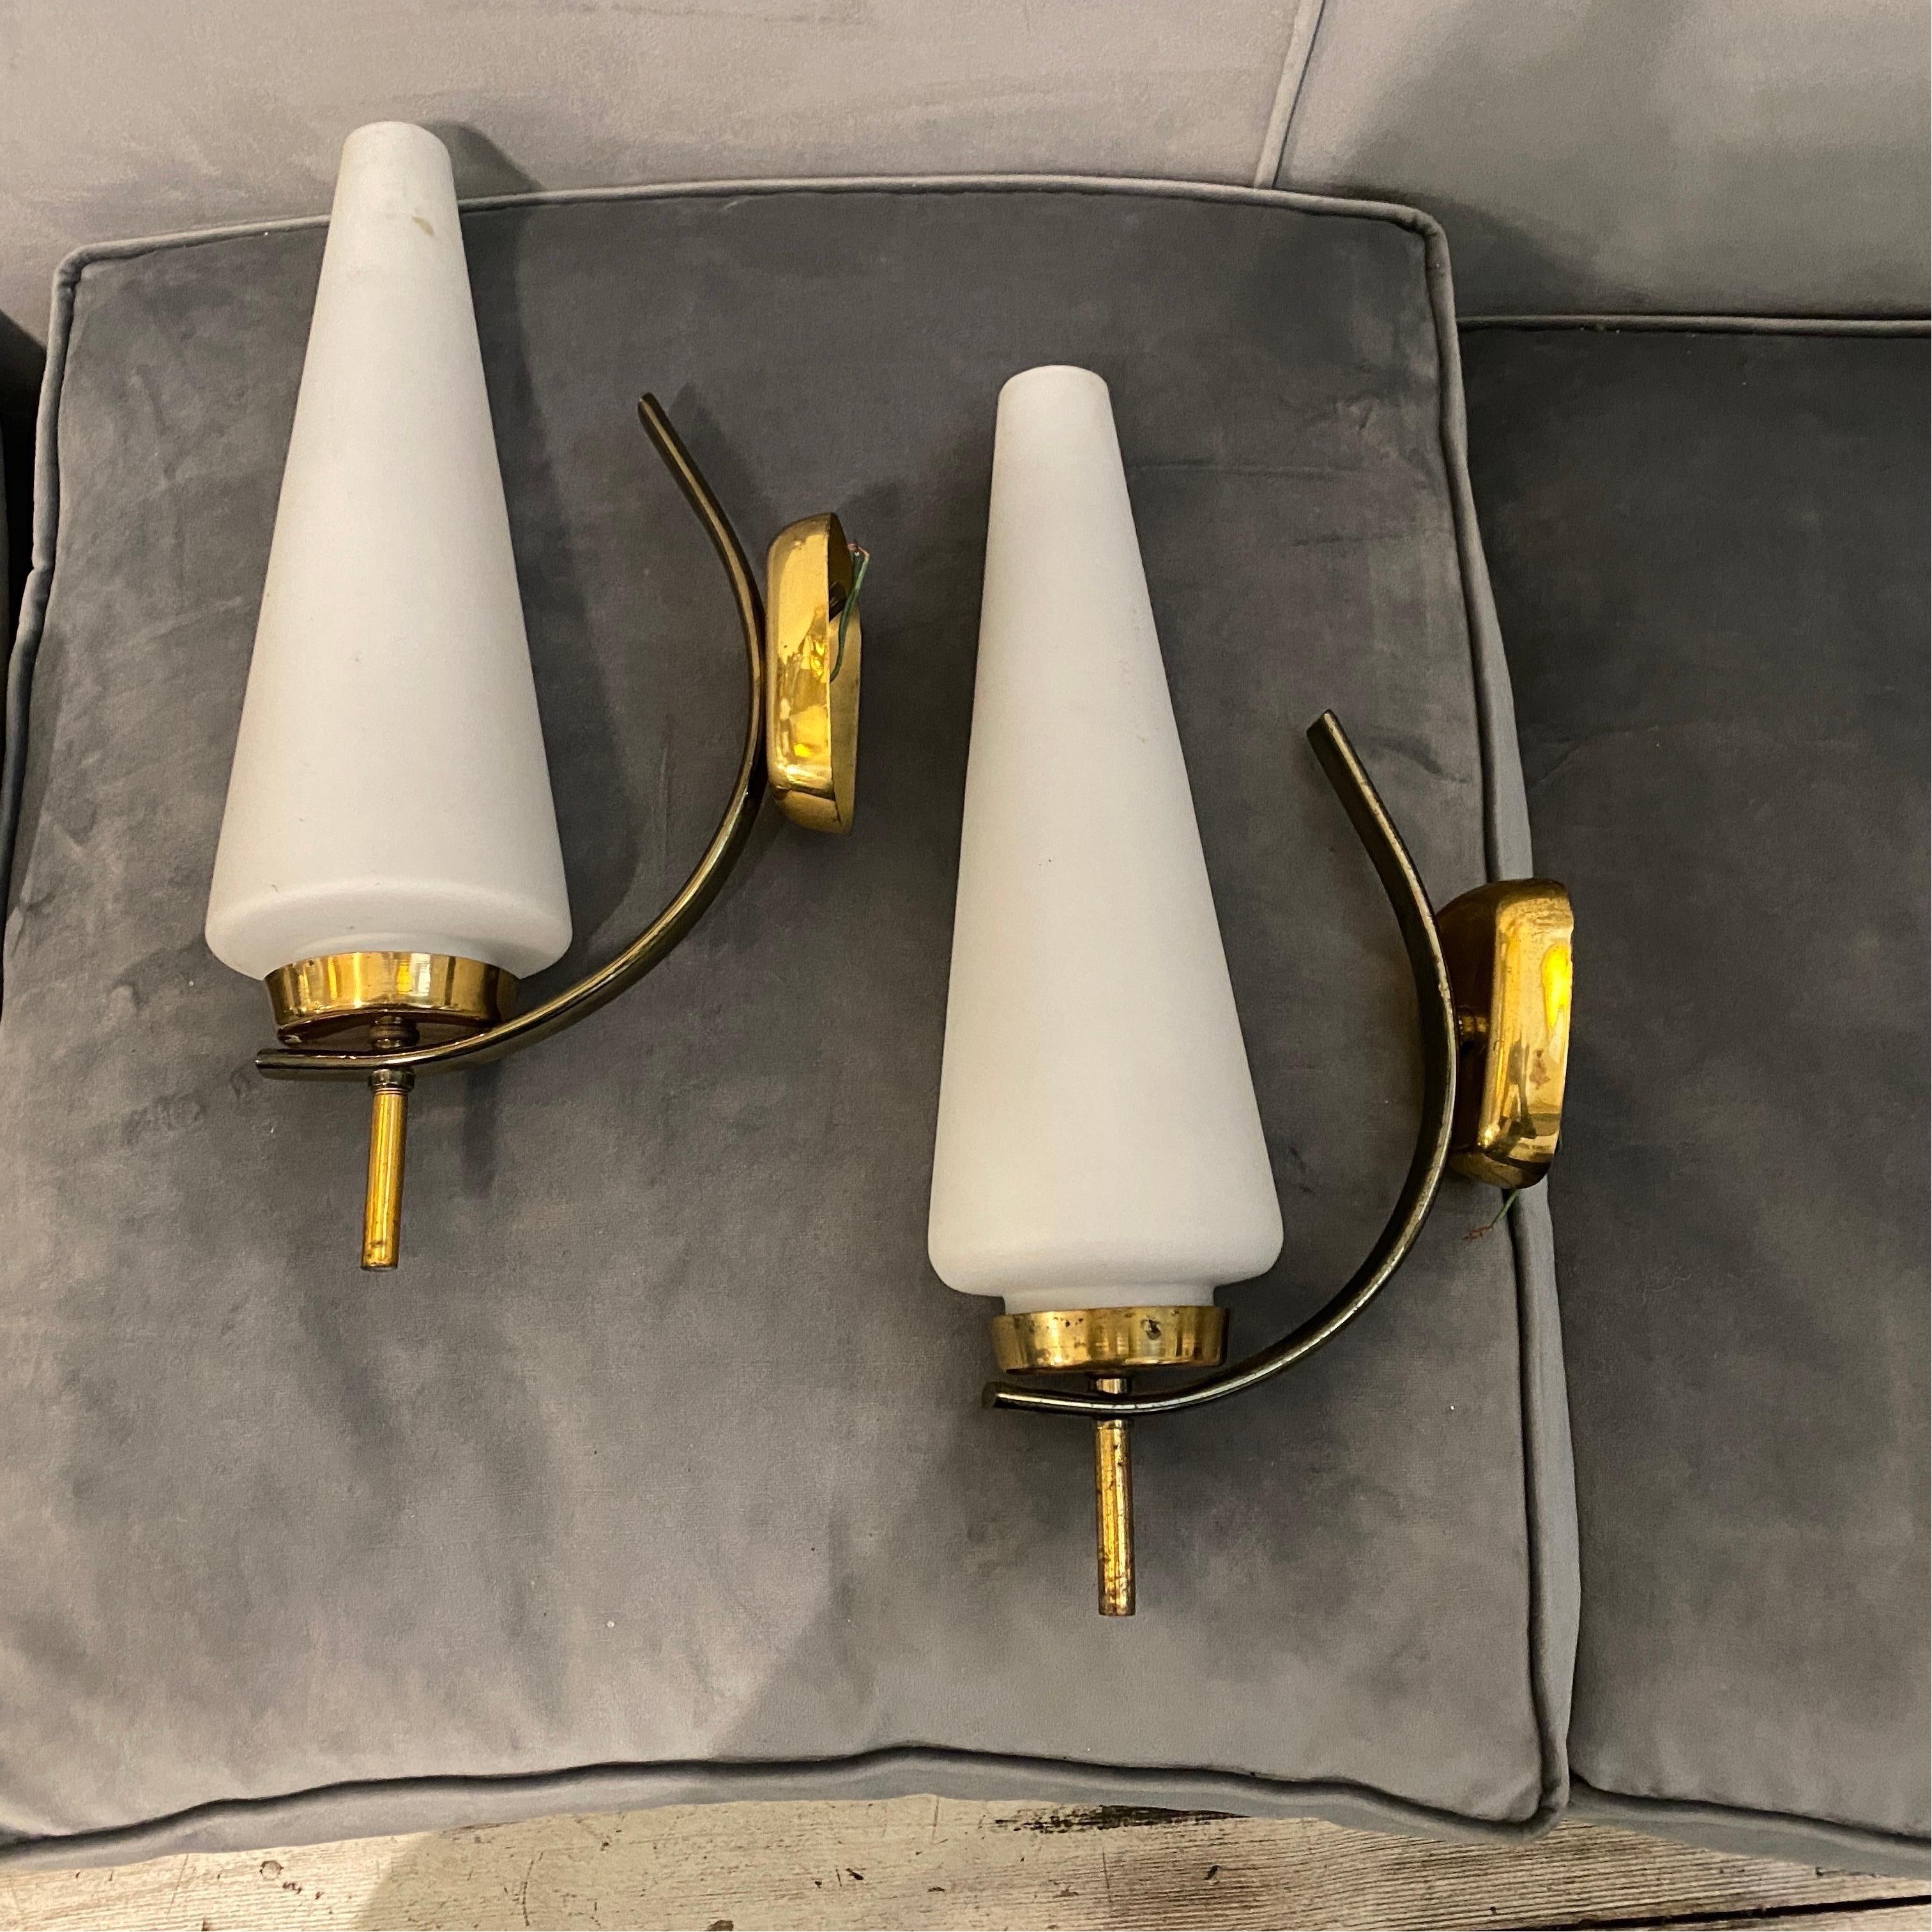 Two Italian wall sconces designed and manufactured in the Sixties in Italy in the manner of Stilnovo, they have been checked by an electrician, work both 110-240 volts and need regular e 14 bulbs. Brass it's in original patina, white glass diffusors